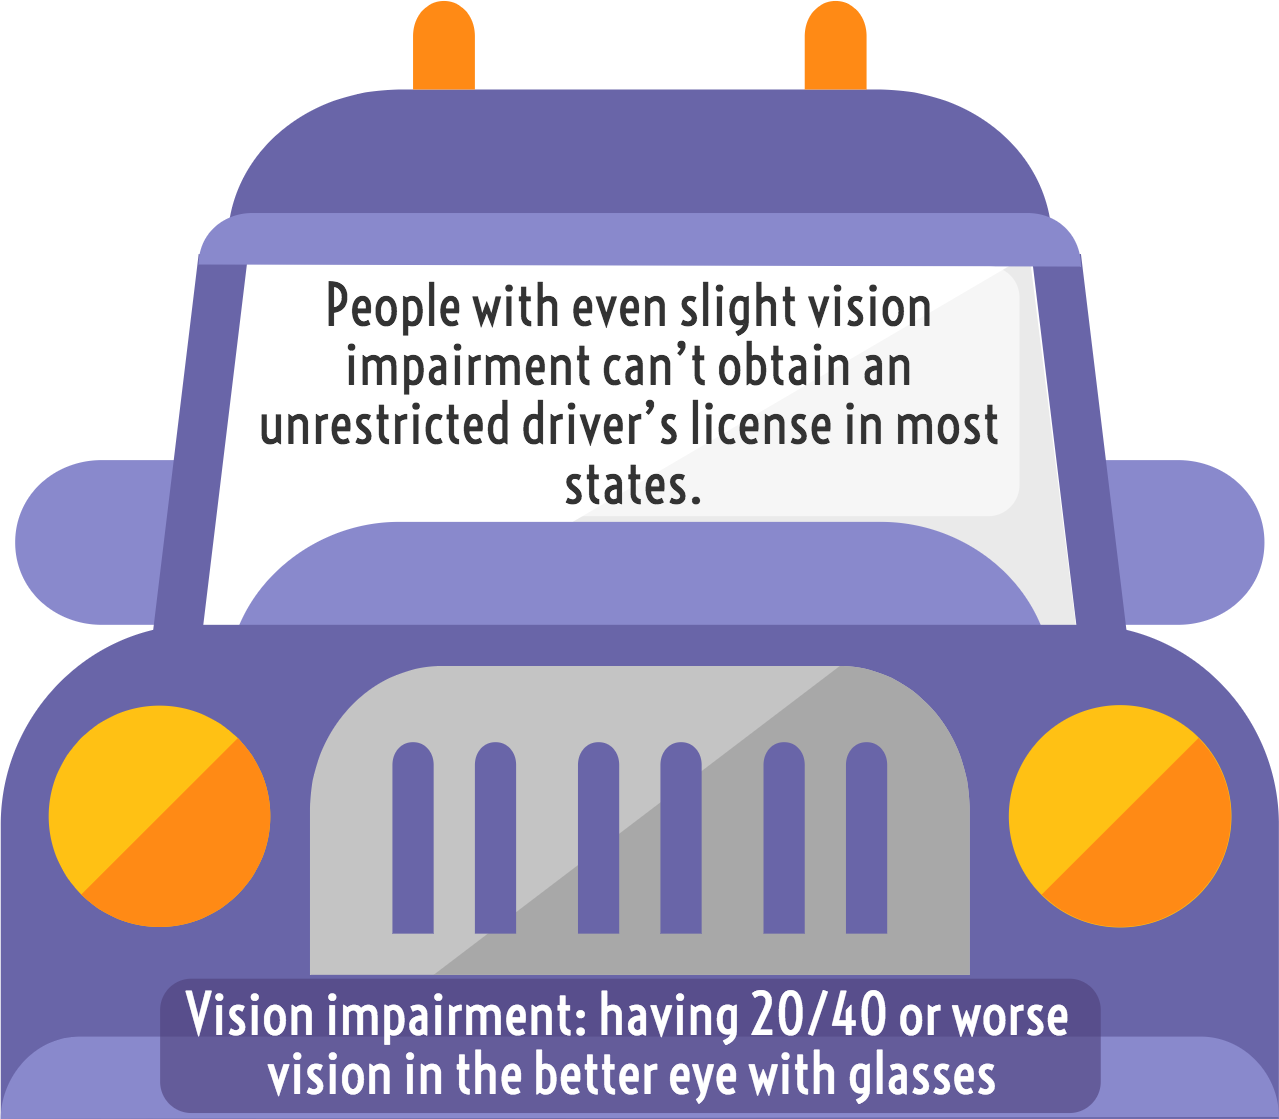 People with even slight vision impairment can't obtain an unrestricted driver's license in most states. Vision impairment: having 20/40 or worse vision in the better eye with glasses